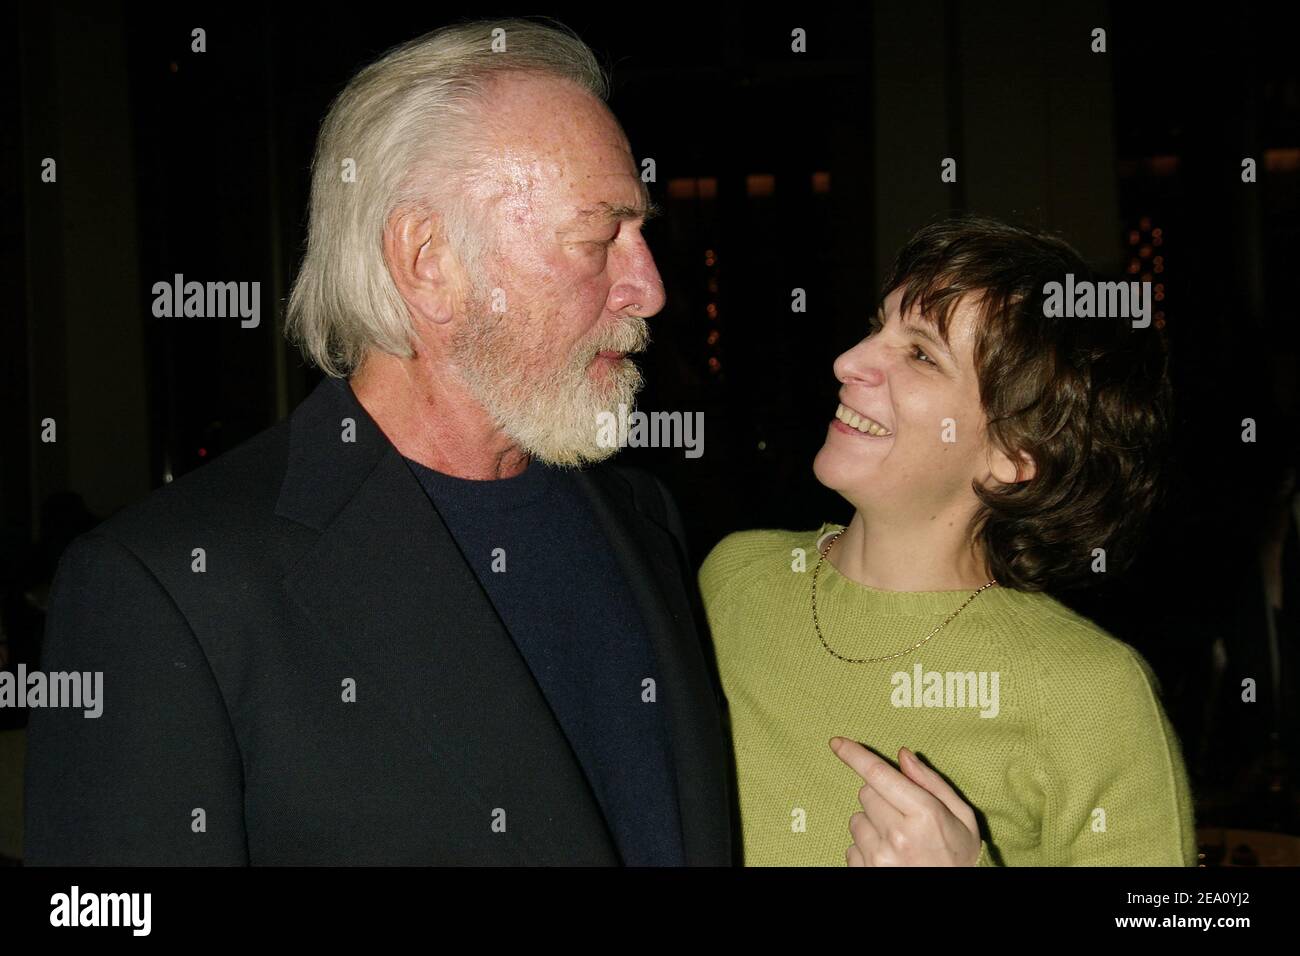 NEW YORK, NY- MARCH 4: Christopher Plummer and Amanda Plummer attending the opening night party for King Lear held at Avery Fisher Hall, on March 4, 2004, in New York City. Credit: Joseph Marzullo/MediaPunch Stock Photo